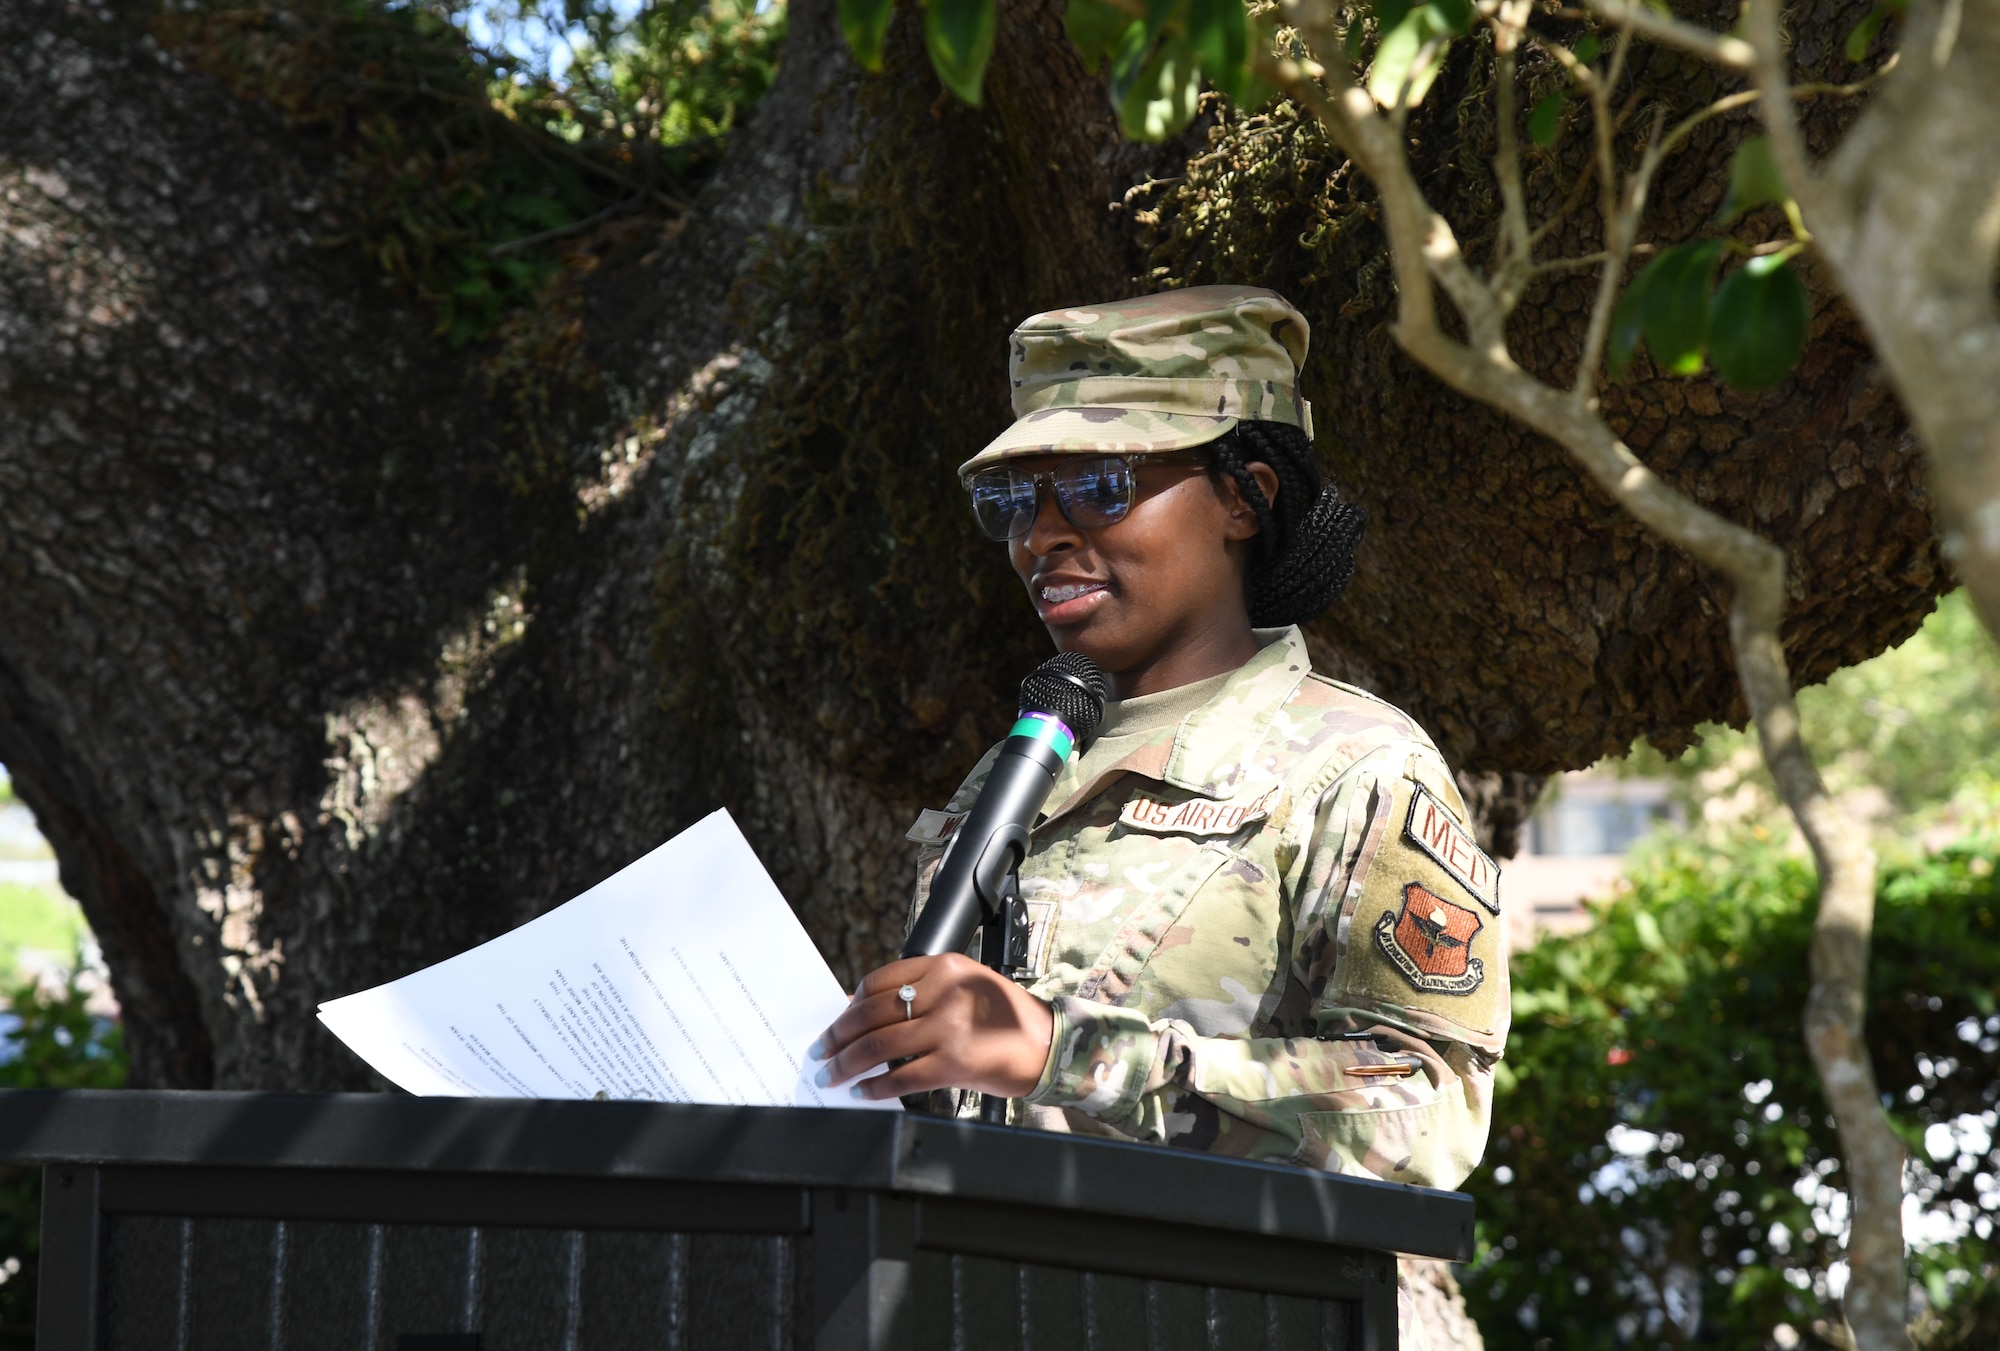 U.S. Air Force Senior Airman Arielle Williams, 81st Healthcare Operations Squadron medical technician, delivers remarks during the Earth Day Airman's Oak Plaque Presentation at Keesler Air Force Base, Mississippi, April 22, 2022. The plaque was unveiled during the event to celebrate Earth Day, with this year's theme being “Invest in Our Planet." (U.S. Air Force photo by Kemberly Groue)